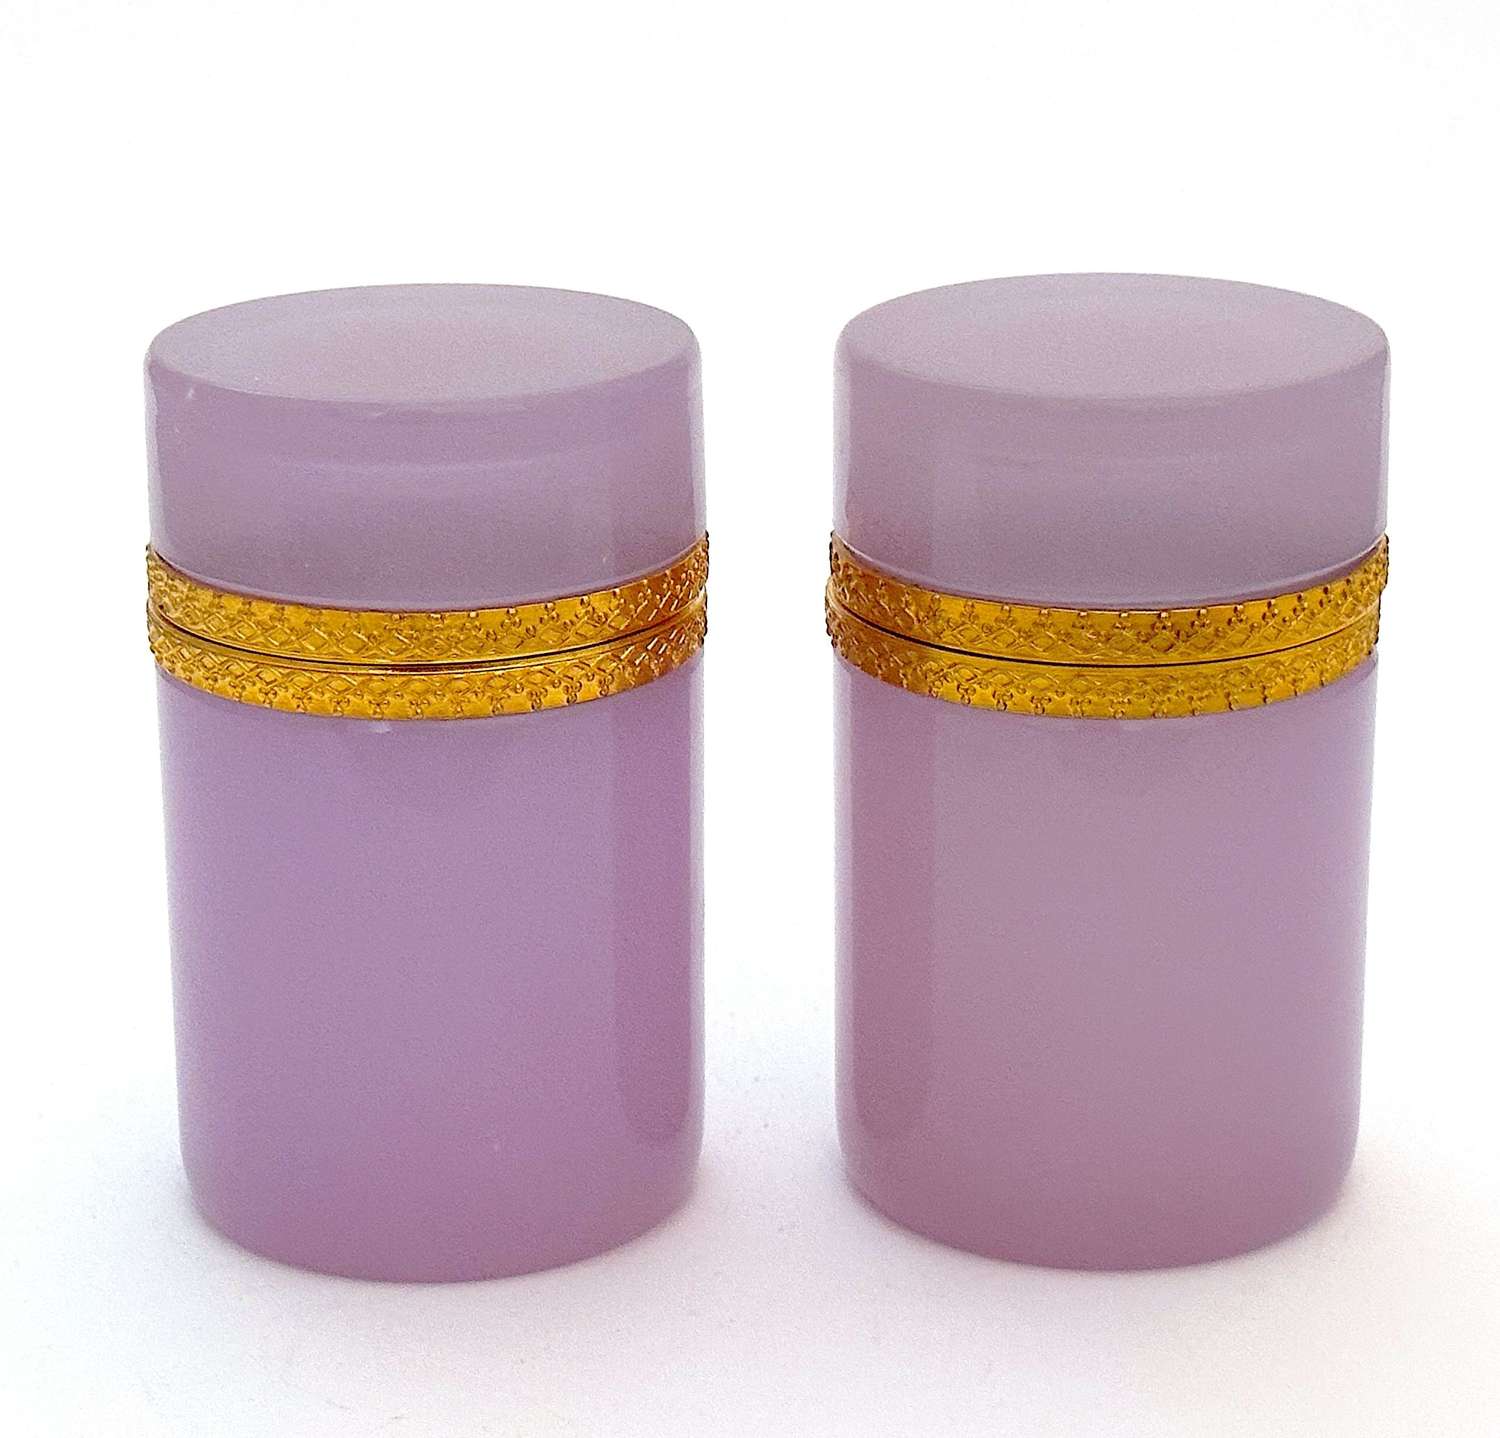 A Pair of Antique Cylindrical Pink Glass Casket Boxes